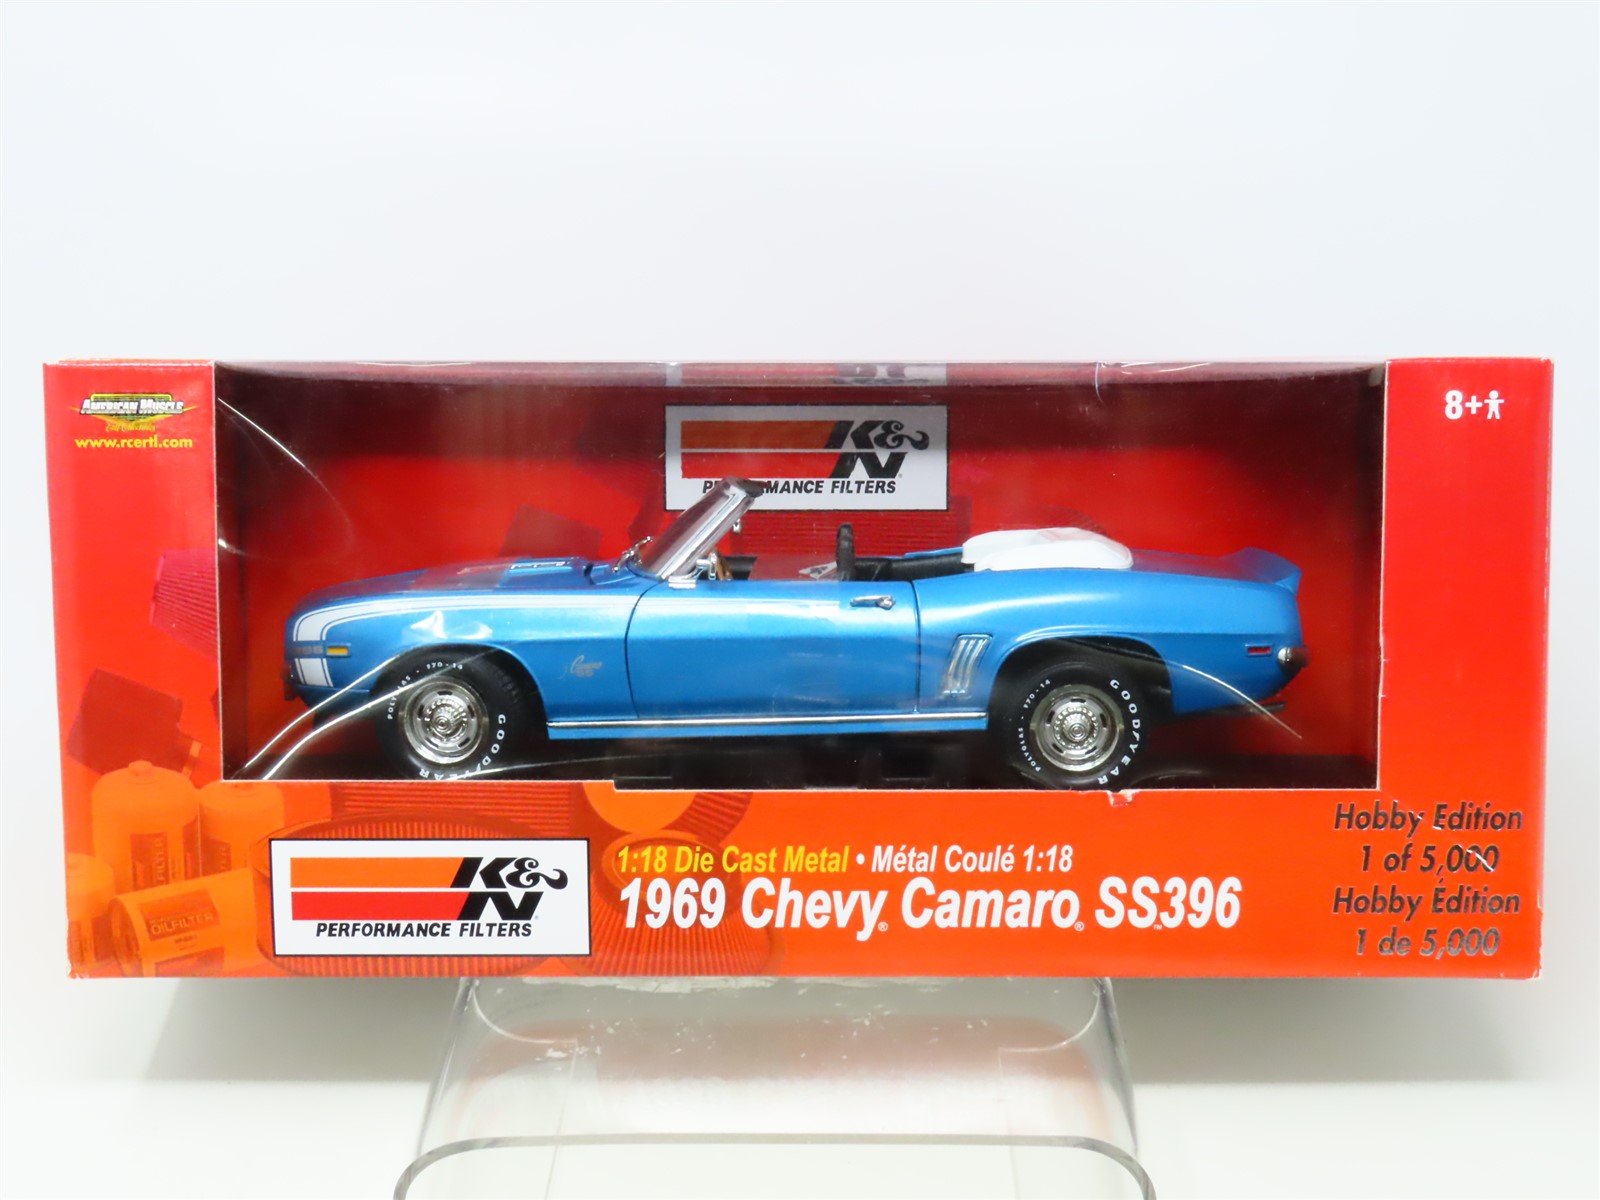 1:18 Scale ERTL American Muscle K&N Hobby Edition 36996 1969 Chevy Camaro SS396